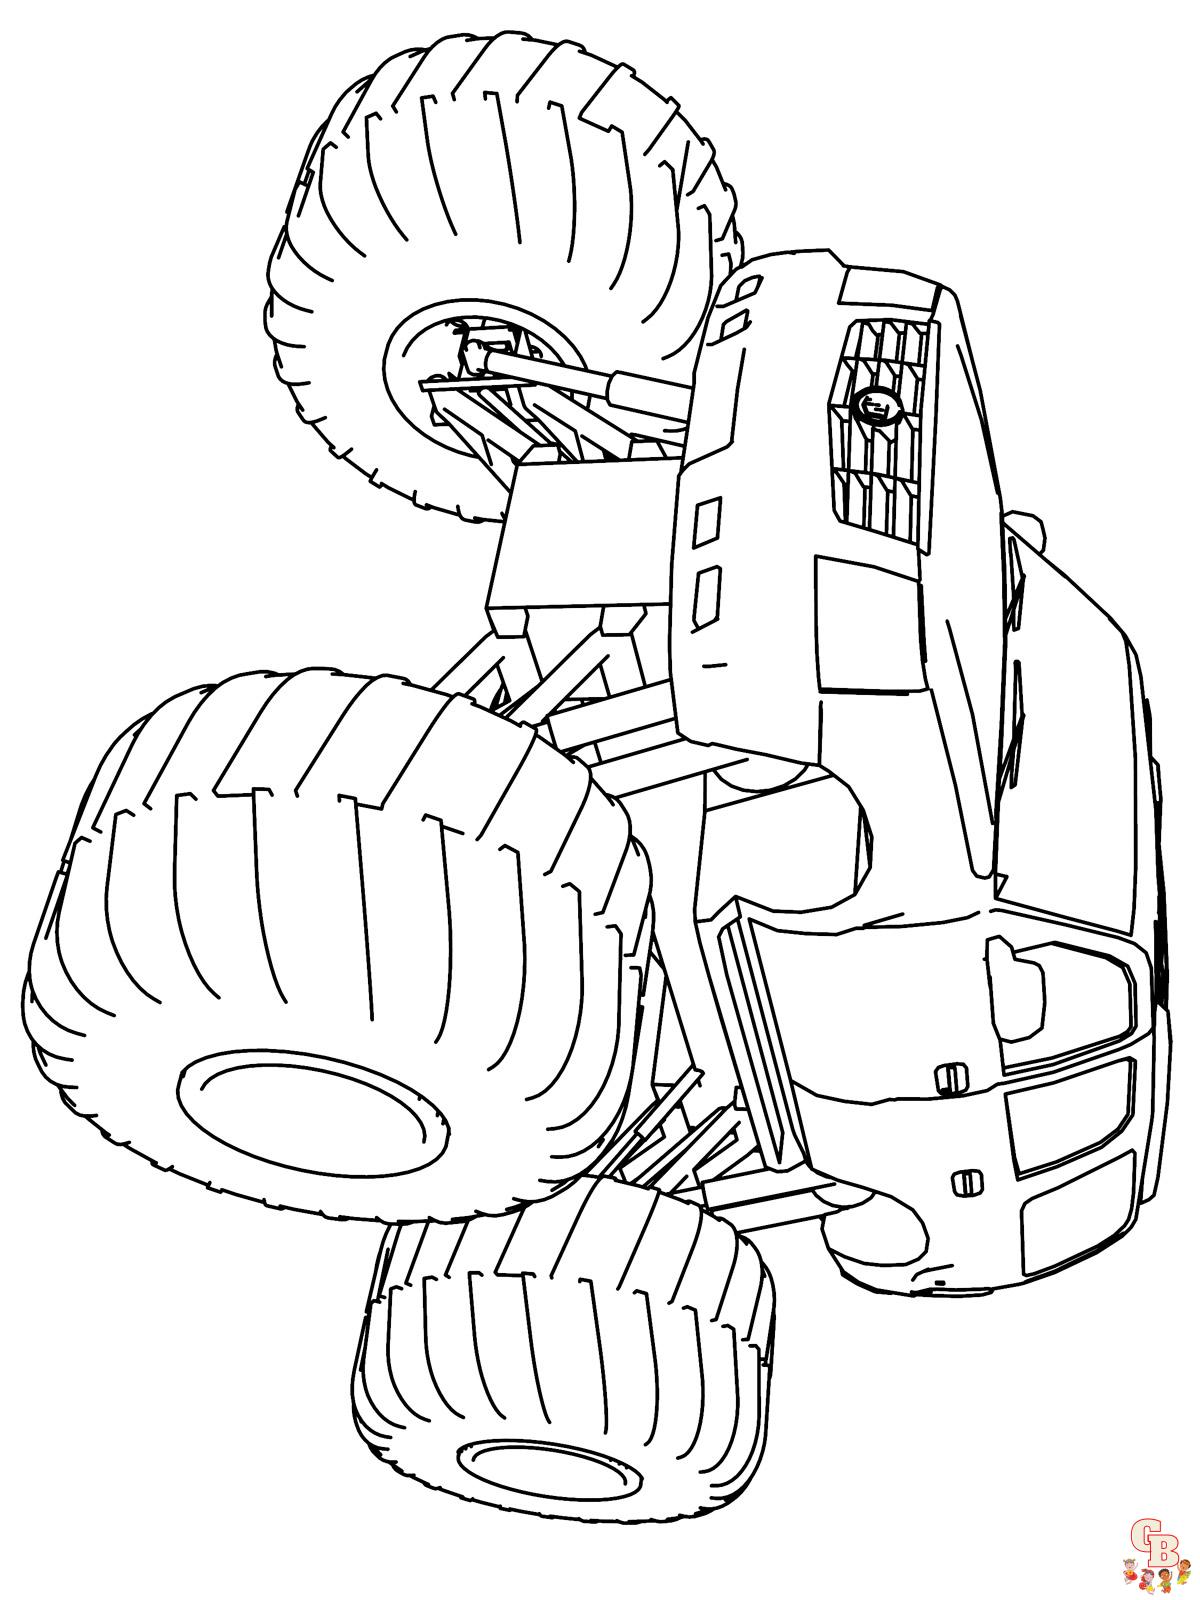 Get your kids excited with free monster jam coloring pages